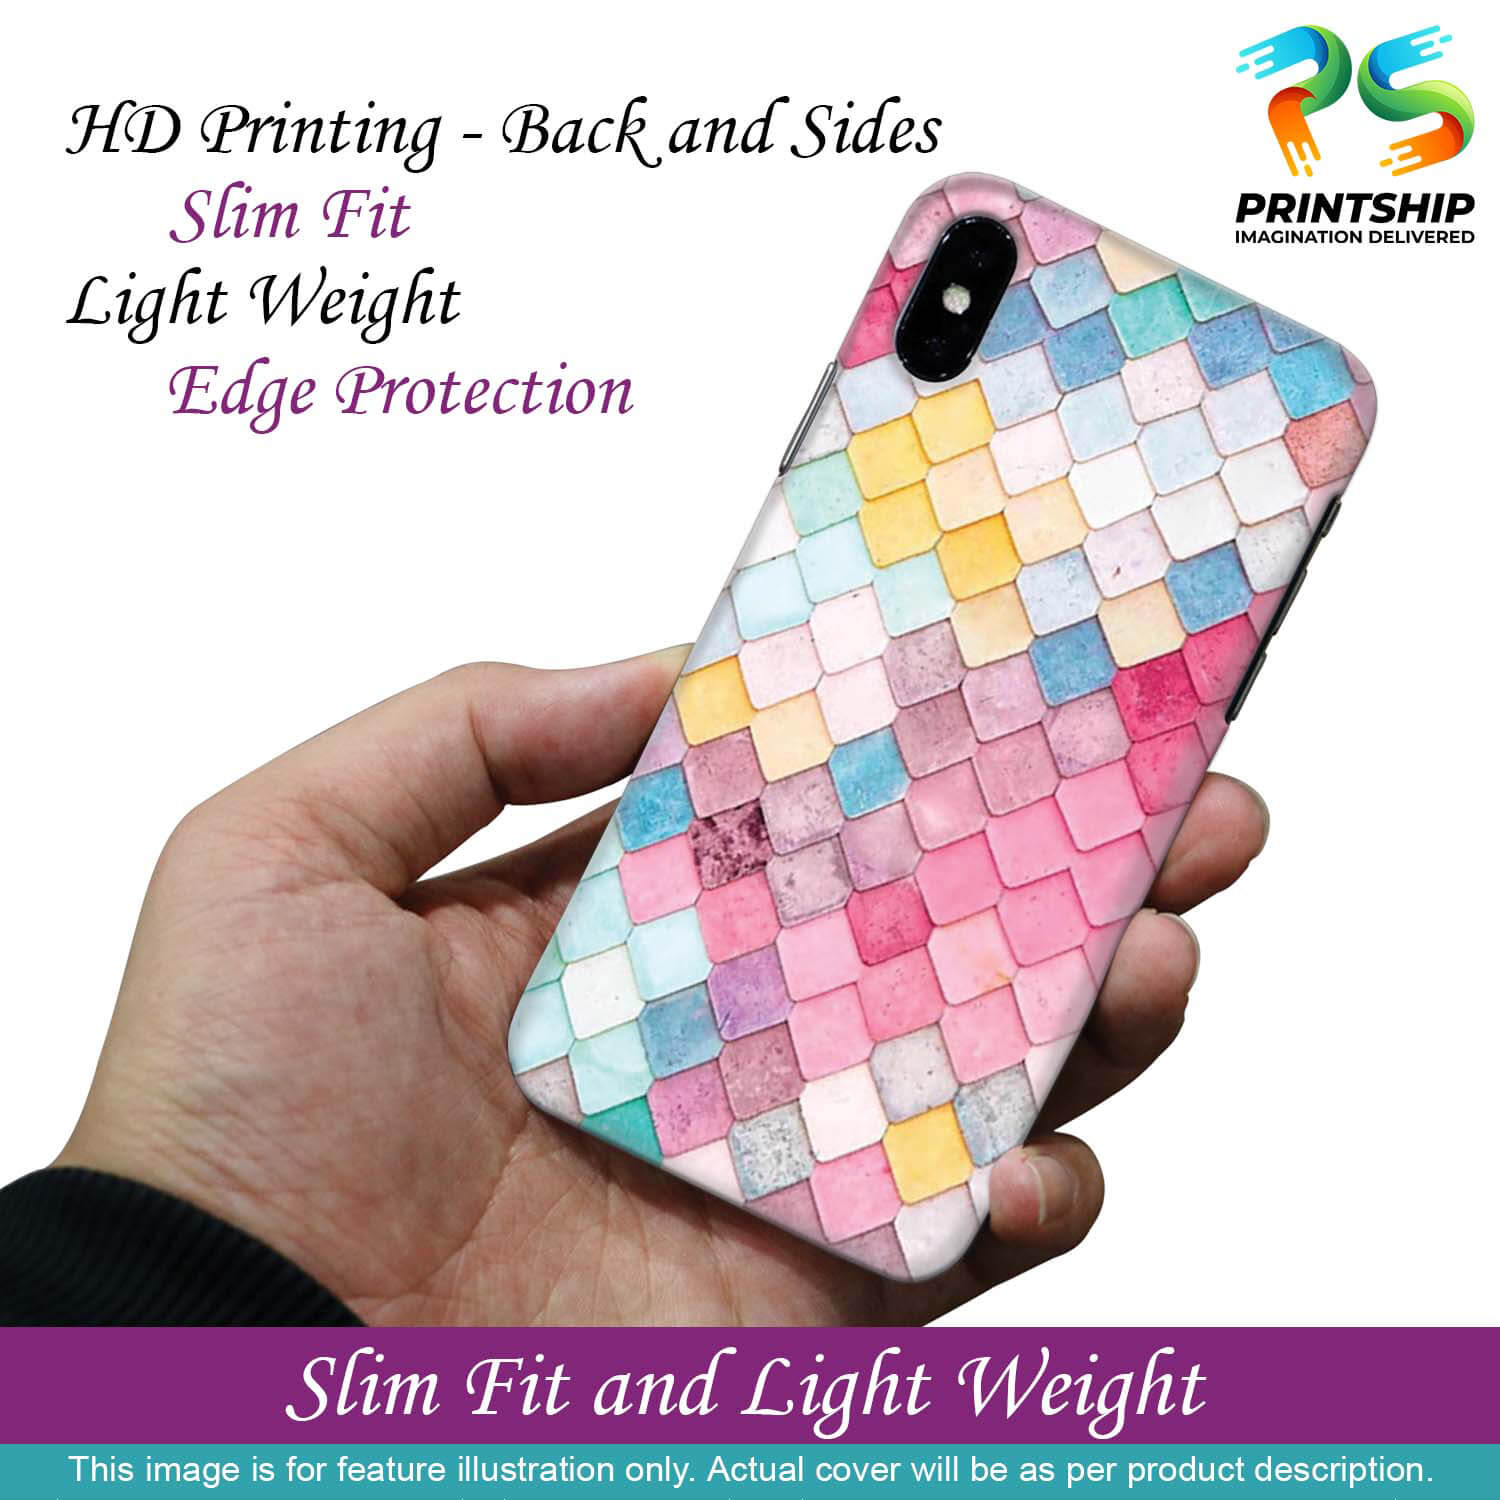 PS1310-Colorful Pastel Back Cover for Samsung Galaxy A2 Core